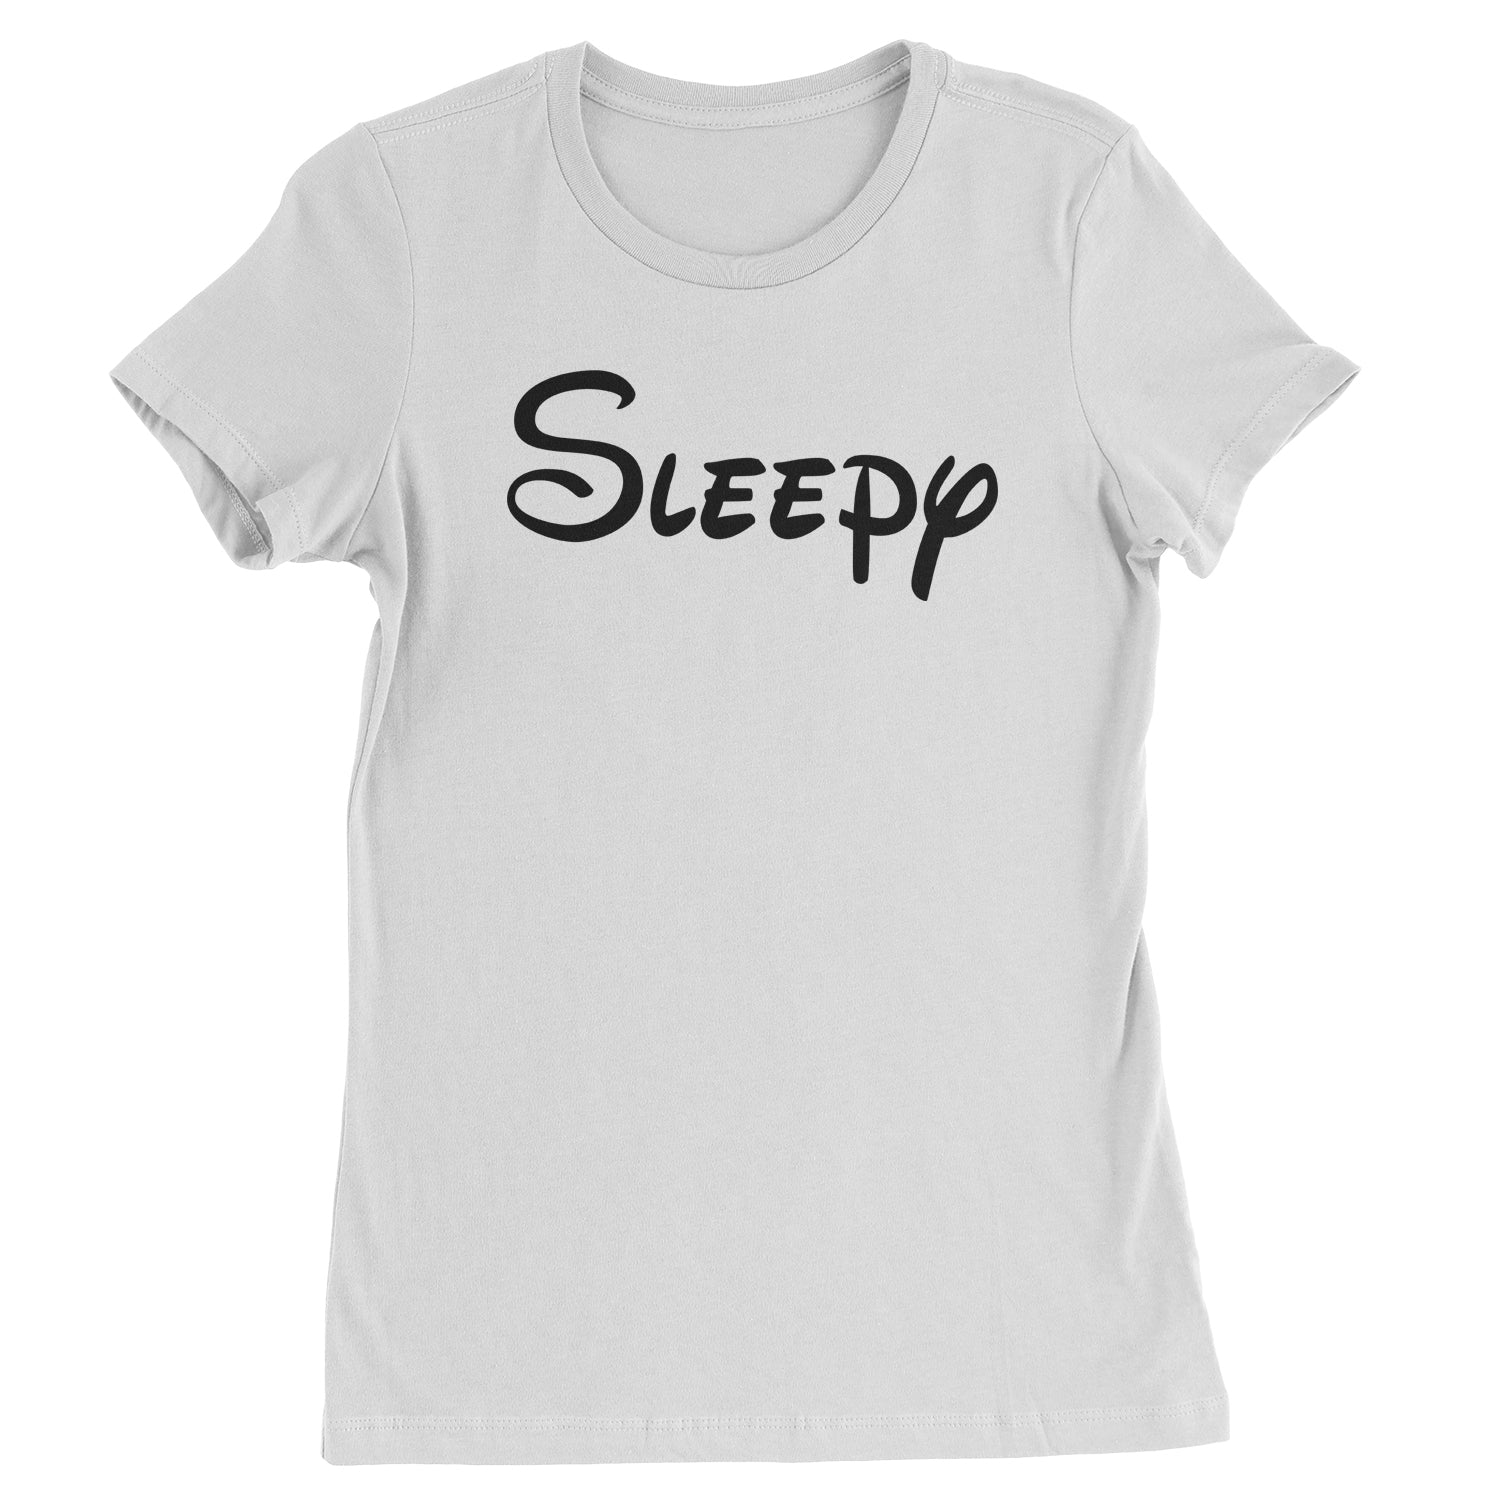 Sleepy - 7 Dwarfs Costume Womens T-shirt and, costume, dwarfs, group, halloween, matching, seven, snow, the, white by Expression Tees